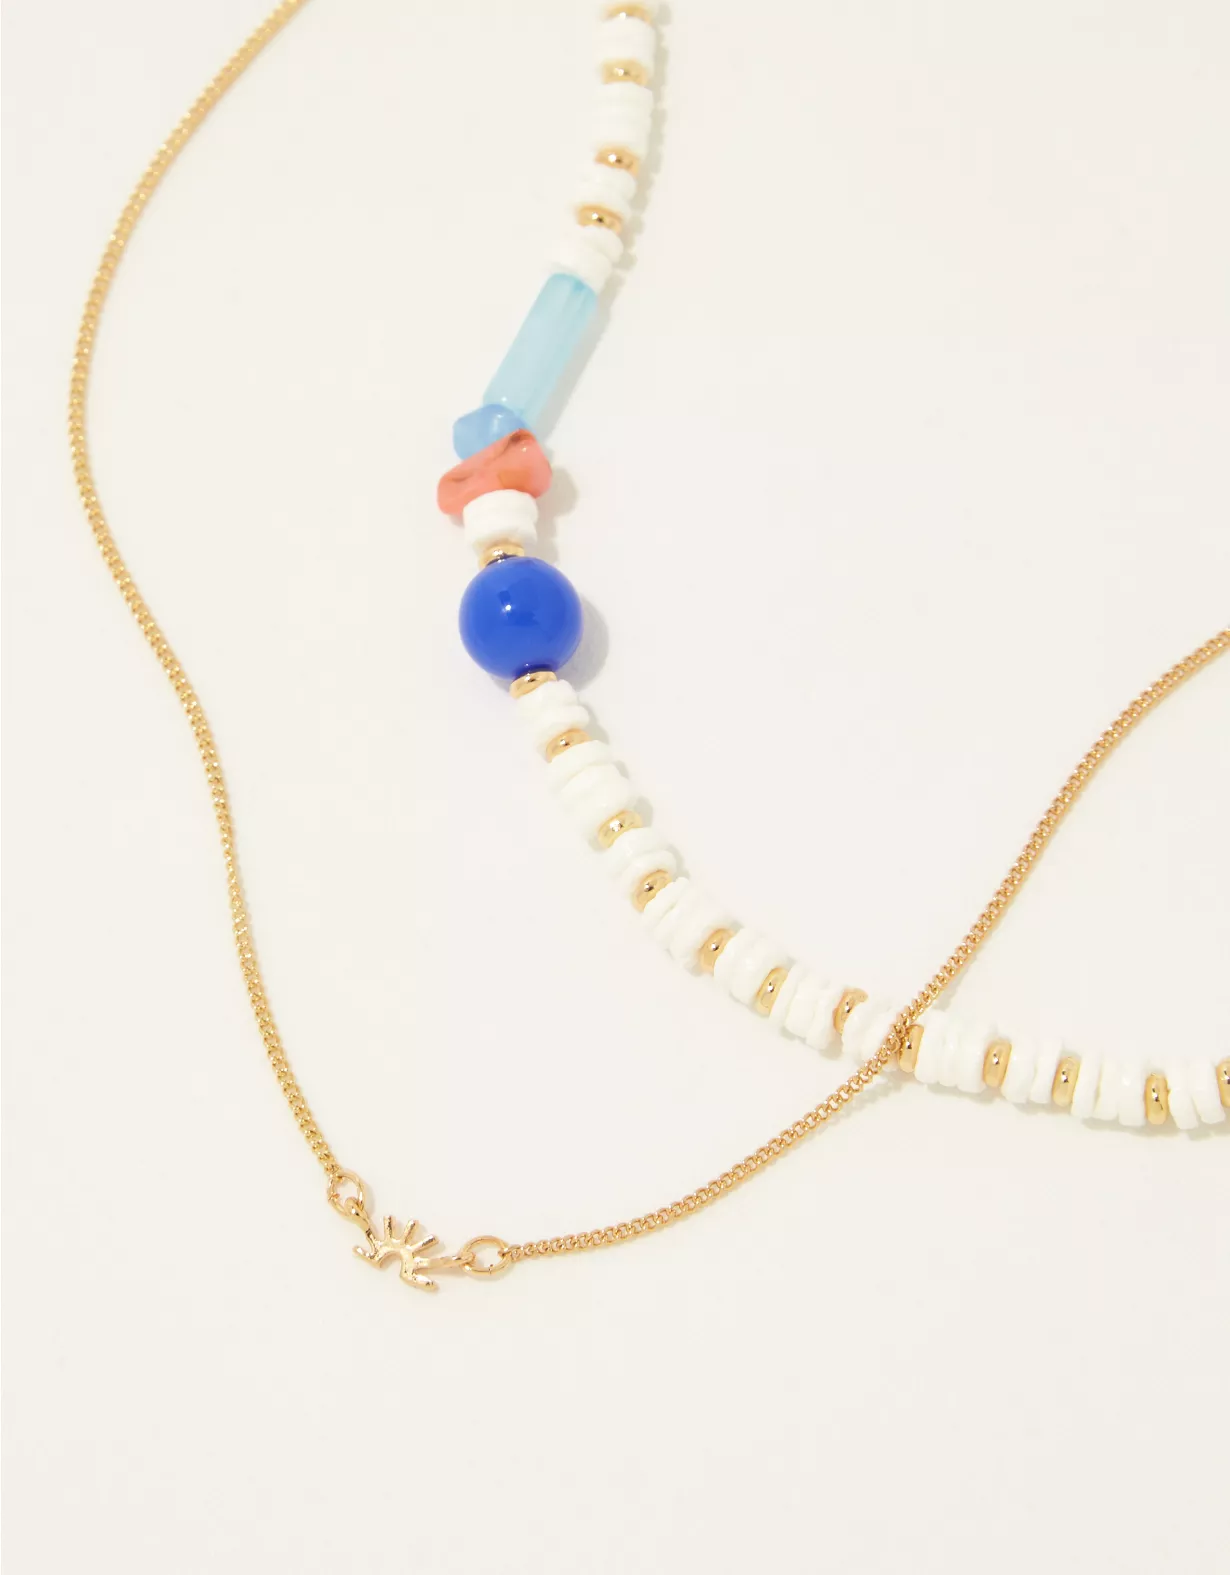 Aerie Glass Bead Shell Necklace